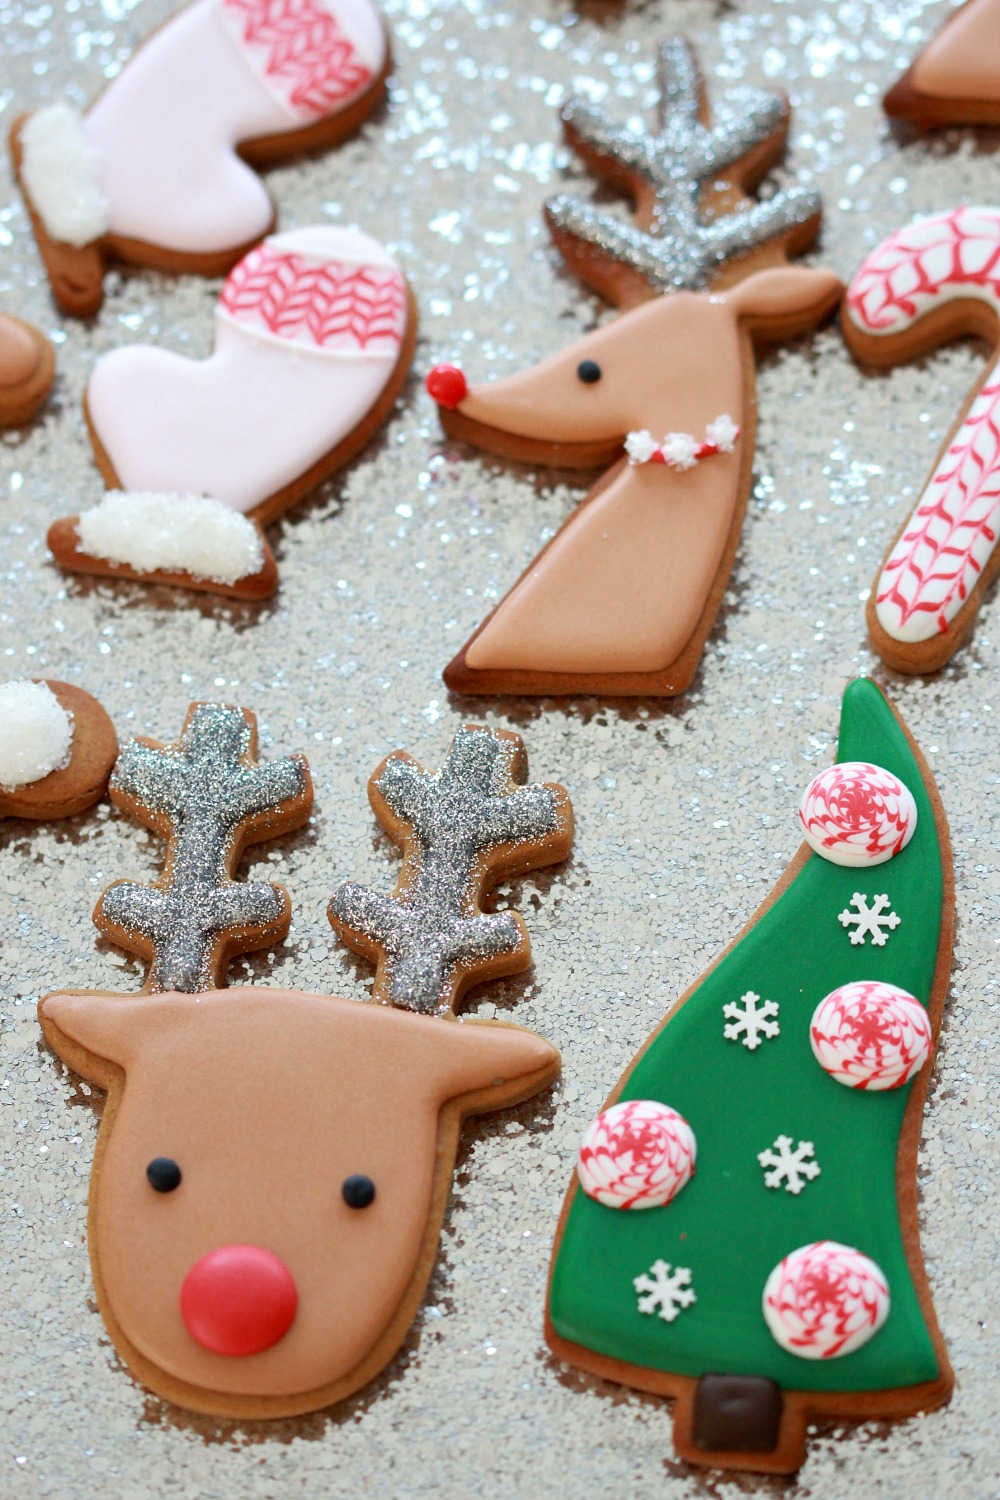 (Video) How to Decorate Christmas Cookies - Simple Designs ...